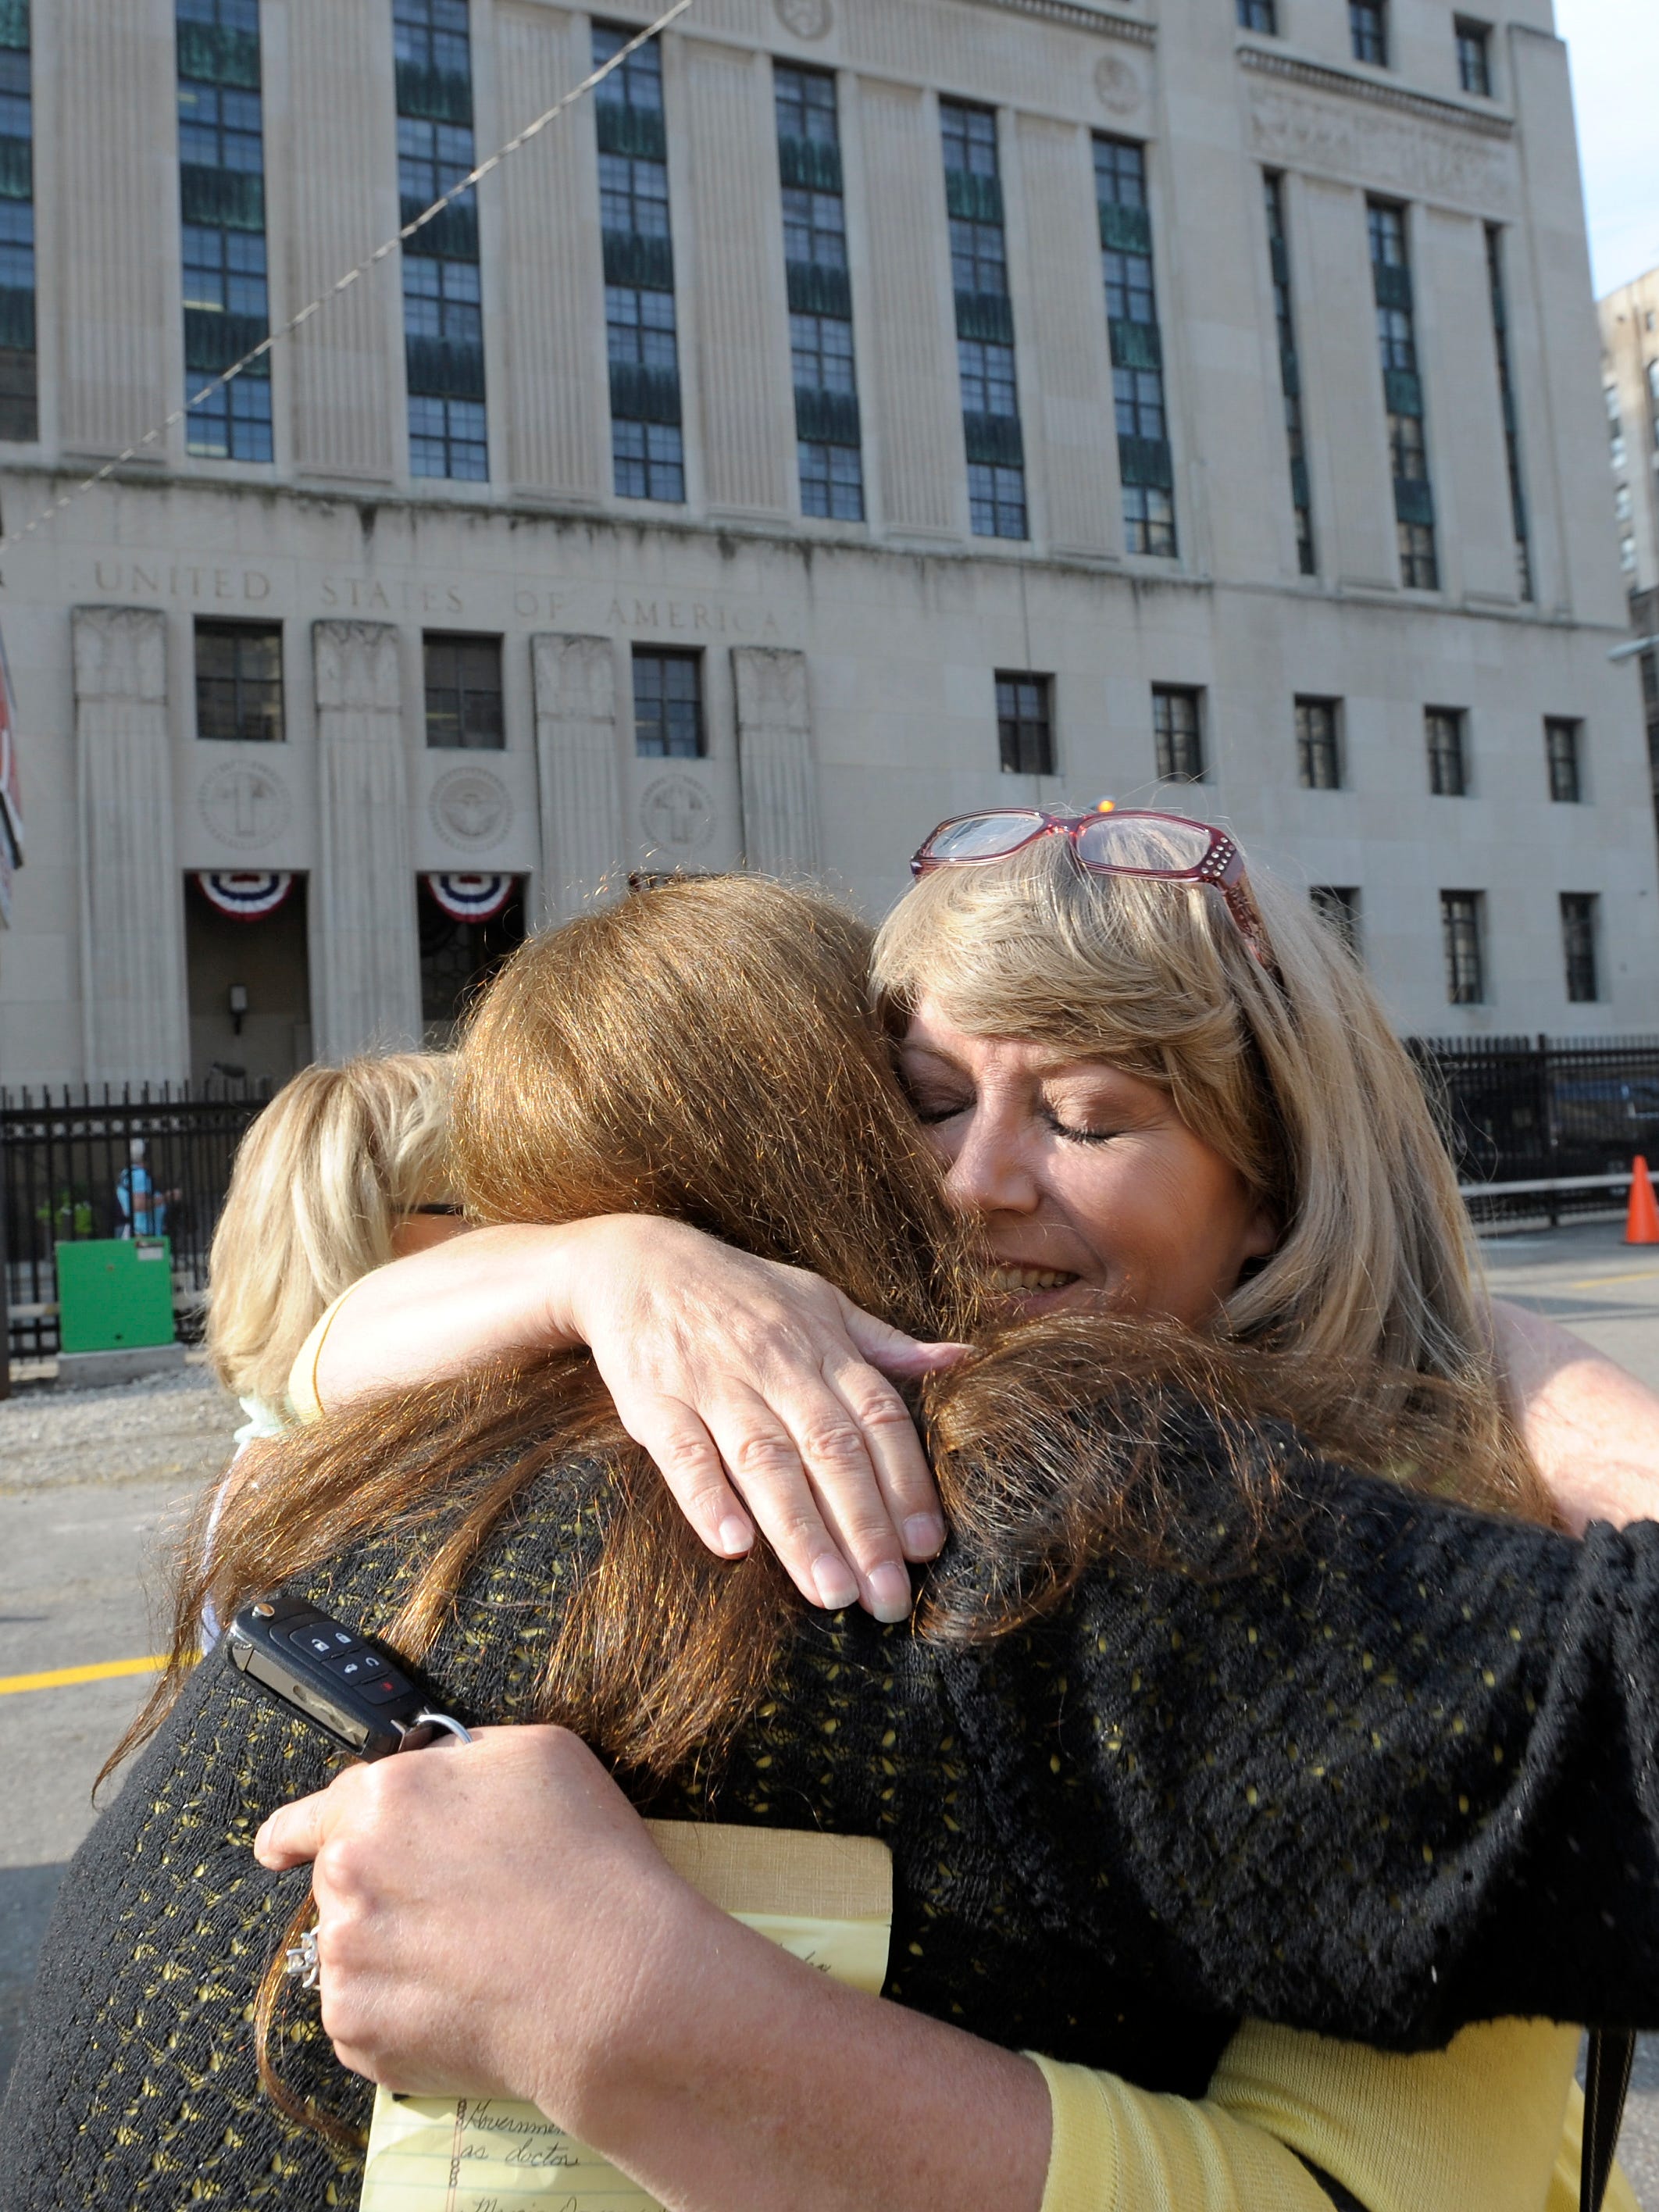 Donna Adams, right, 54, of Romeo, whose father-in-law, Rudy Adams, was a patient of Fata's and is still alive, hugs Karen Compton, left, 55, of Otter Lake, whose mother died of cancer.